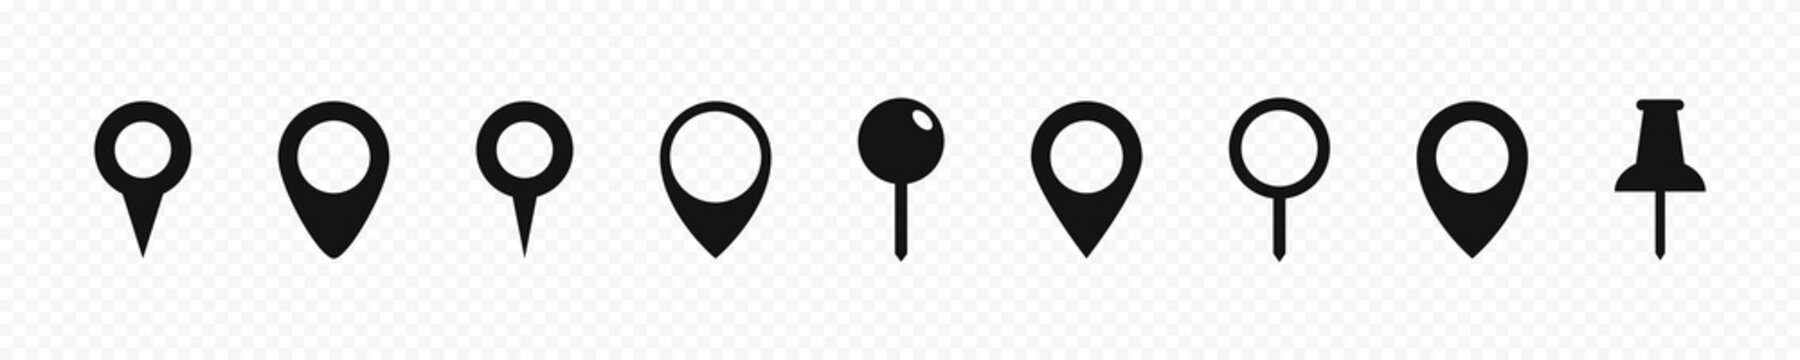 Location pointers set. Flat isolated location pointers icon set. Map pin collection. Black pin pointers design. Vector graphic